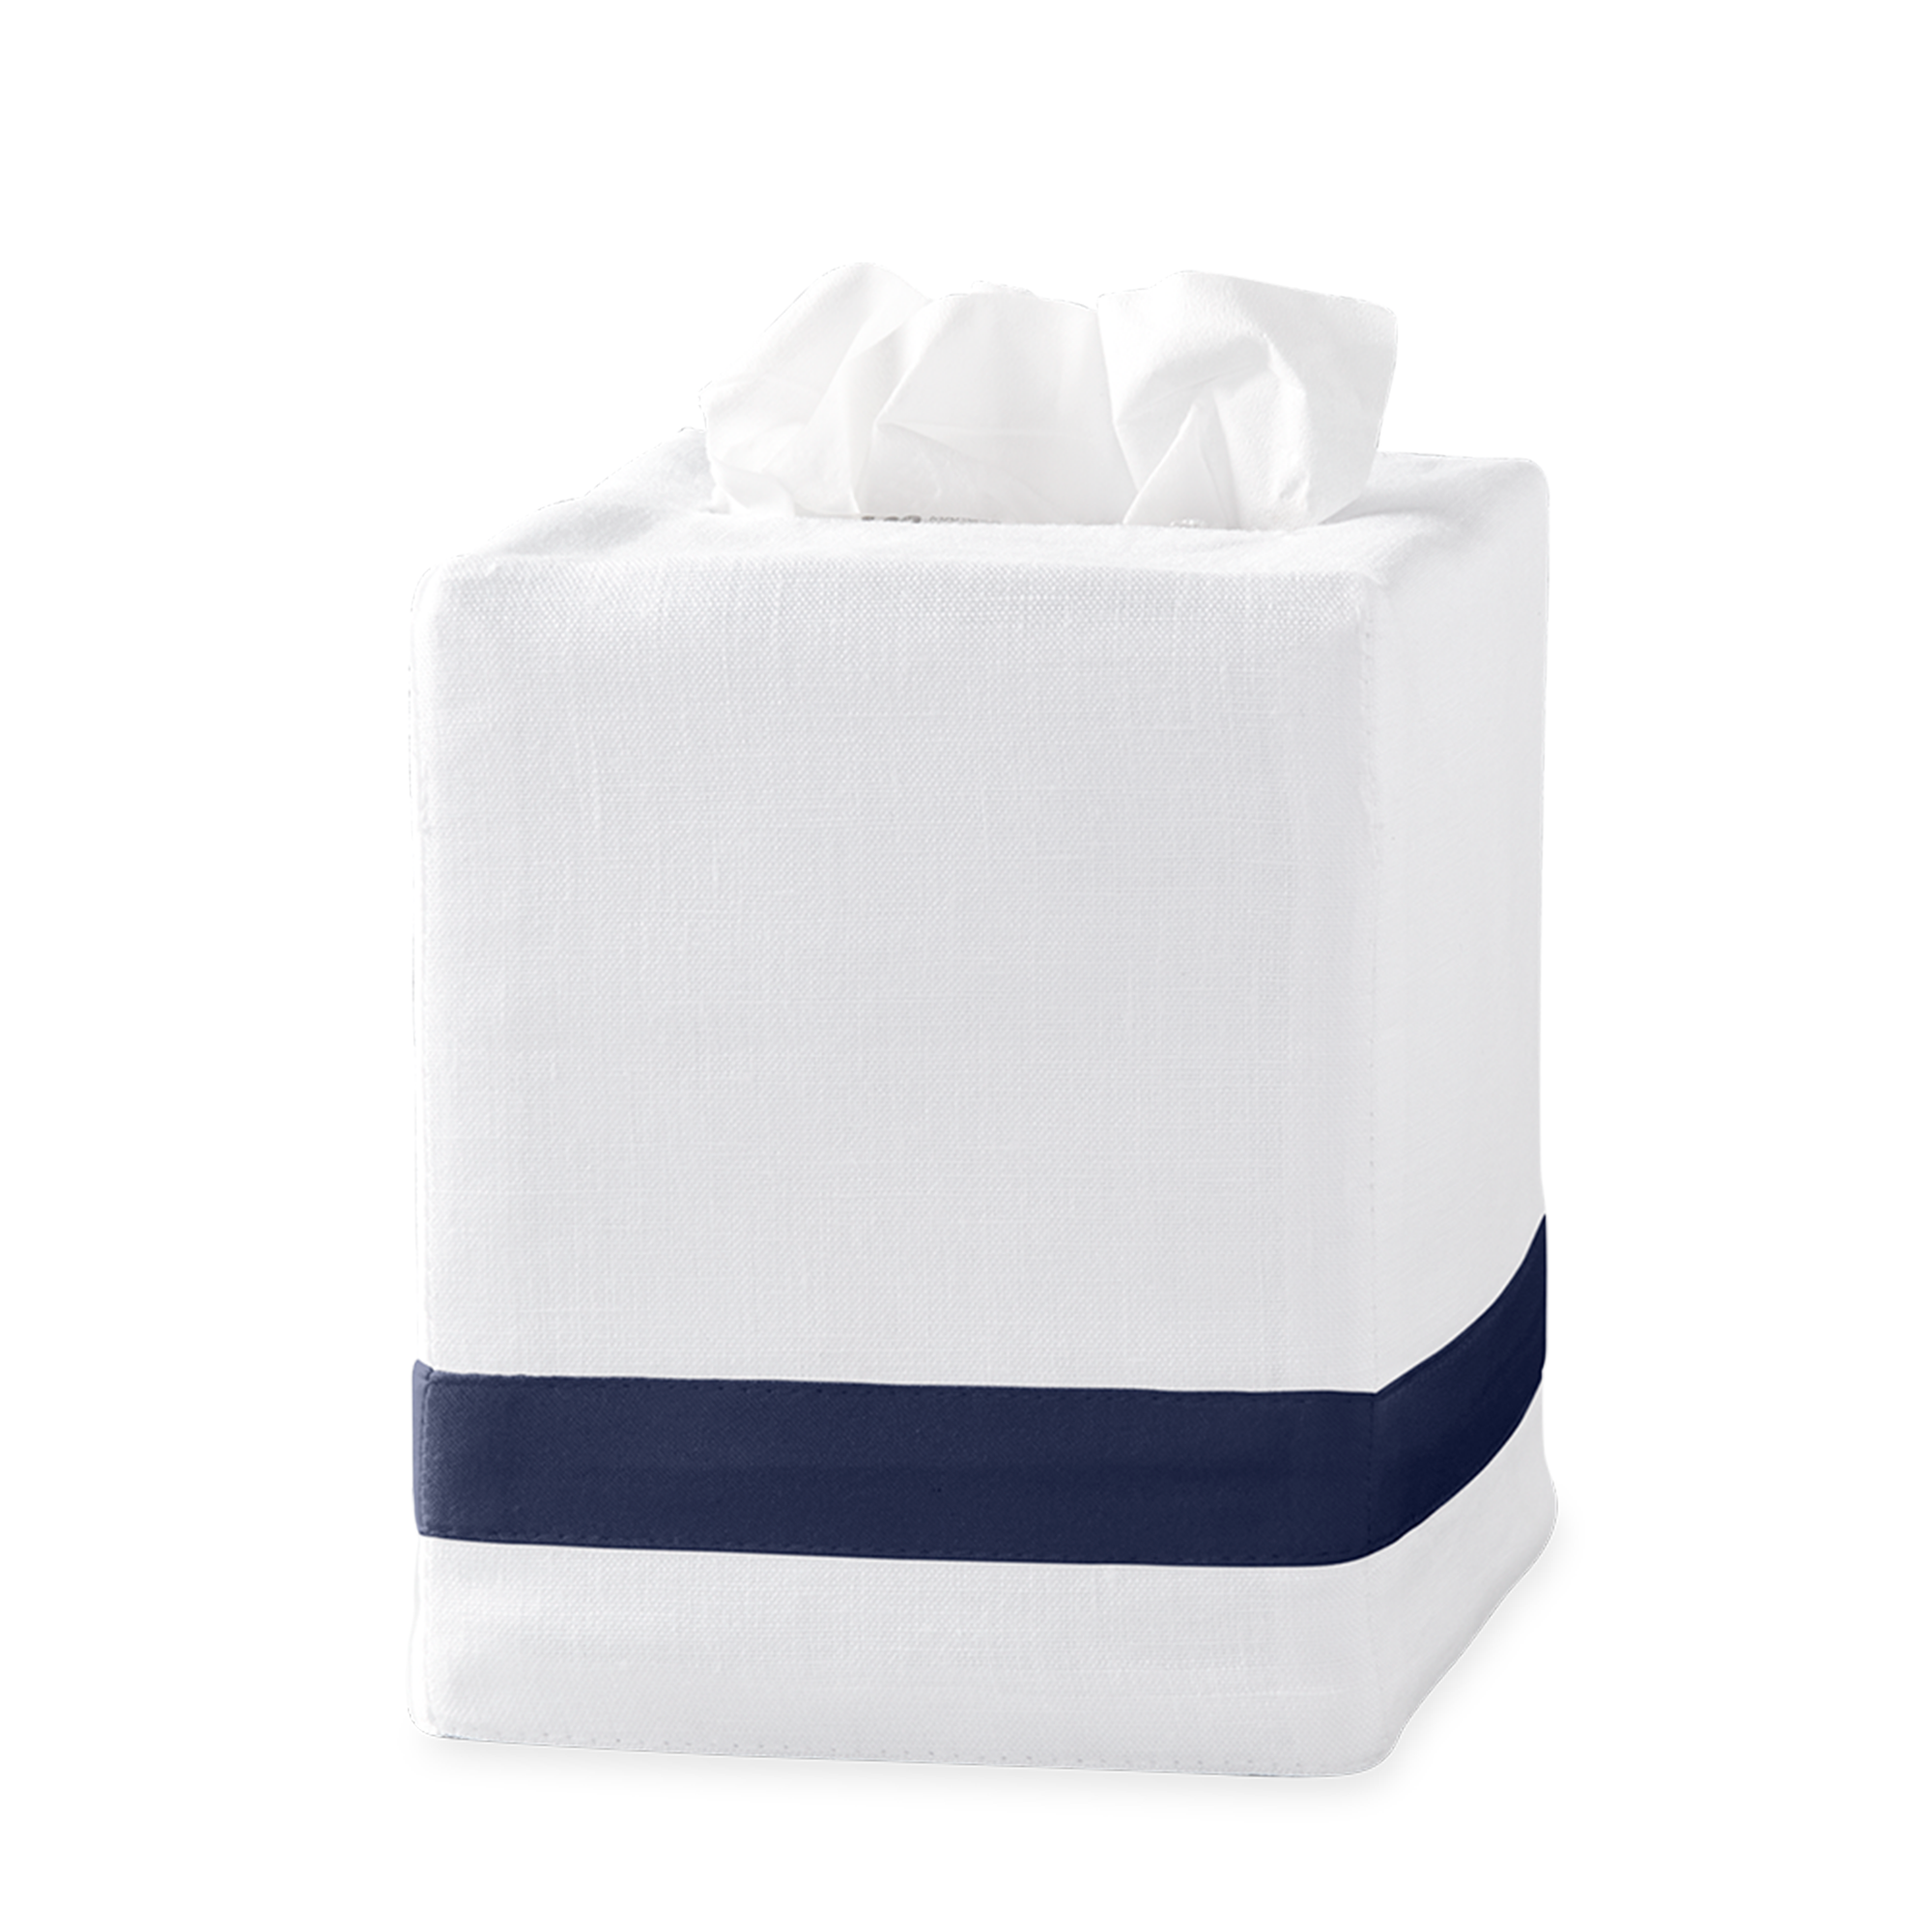 Silo Image of Matouk Lowell Tissue Box Cover in Color Navy